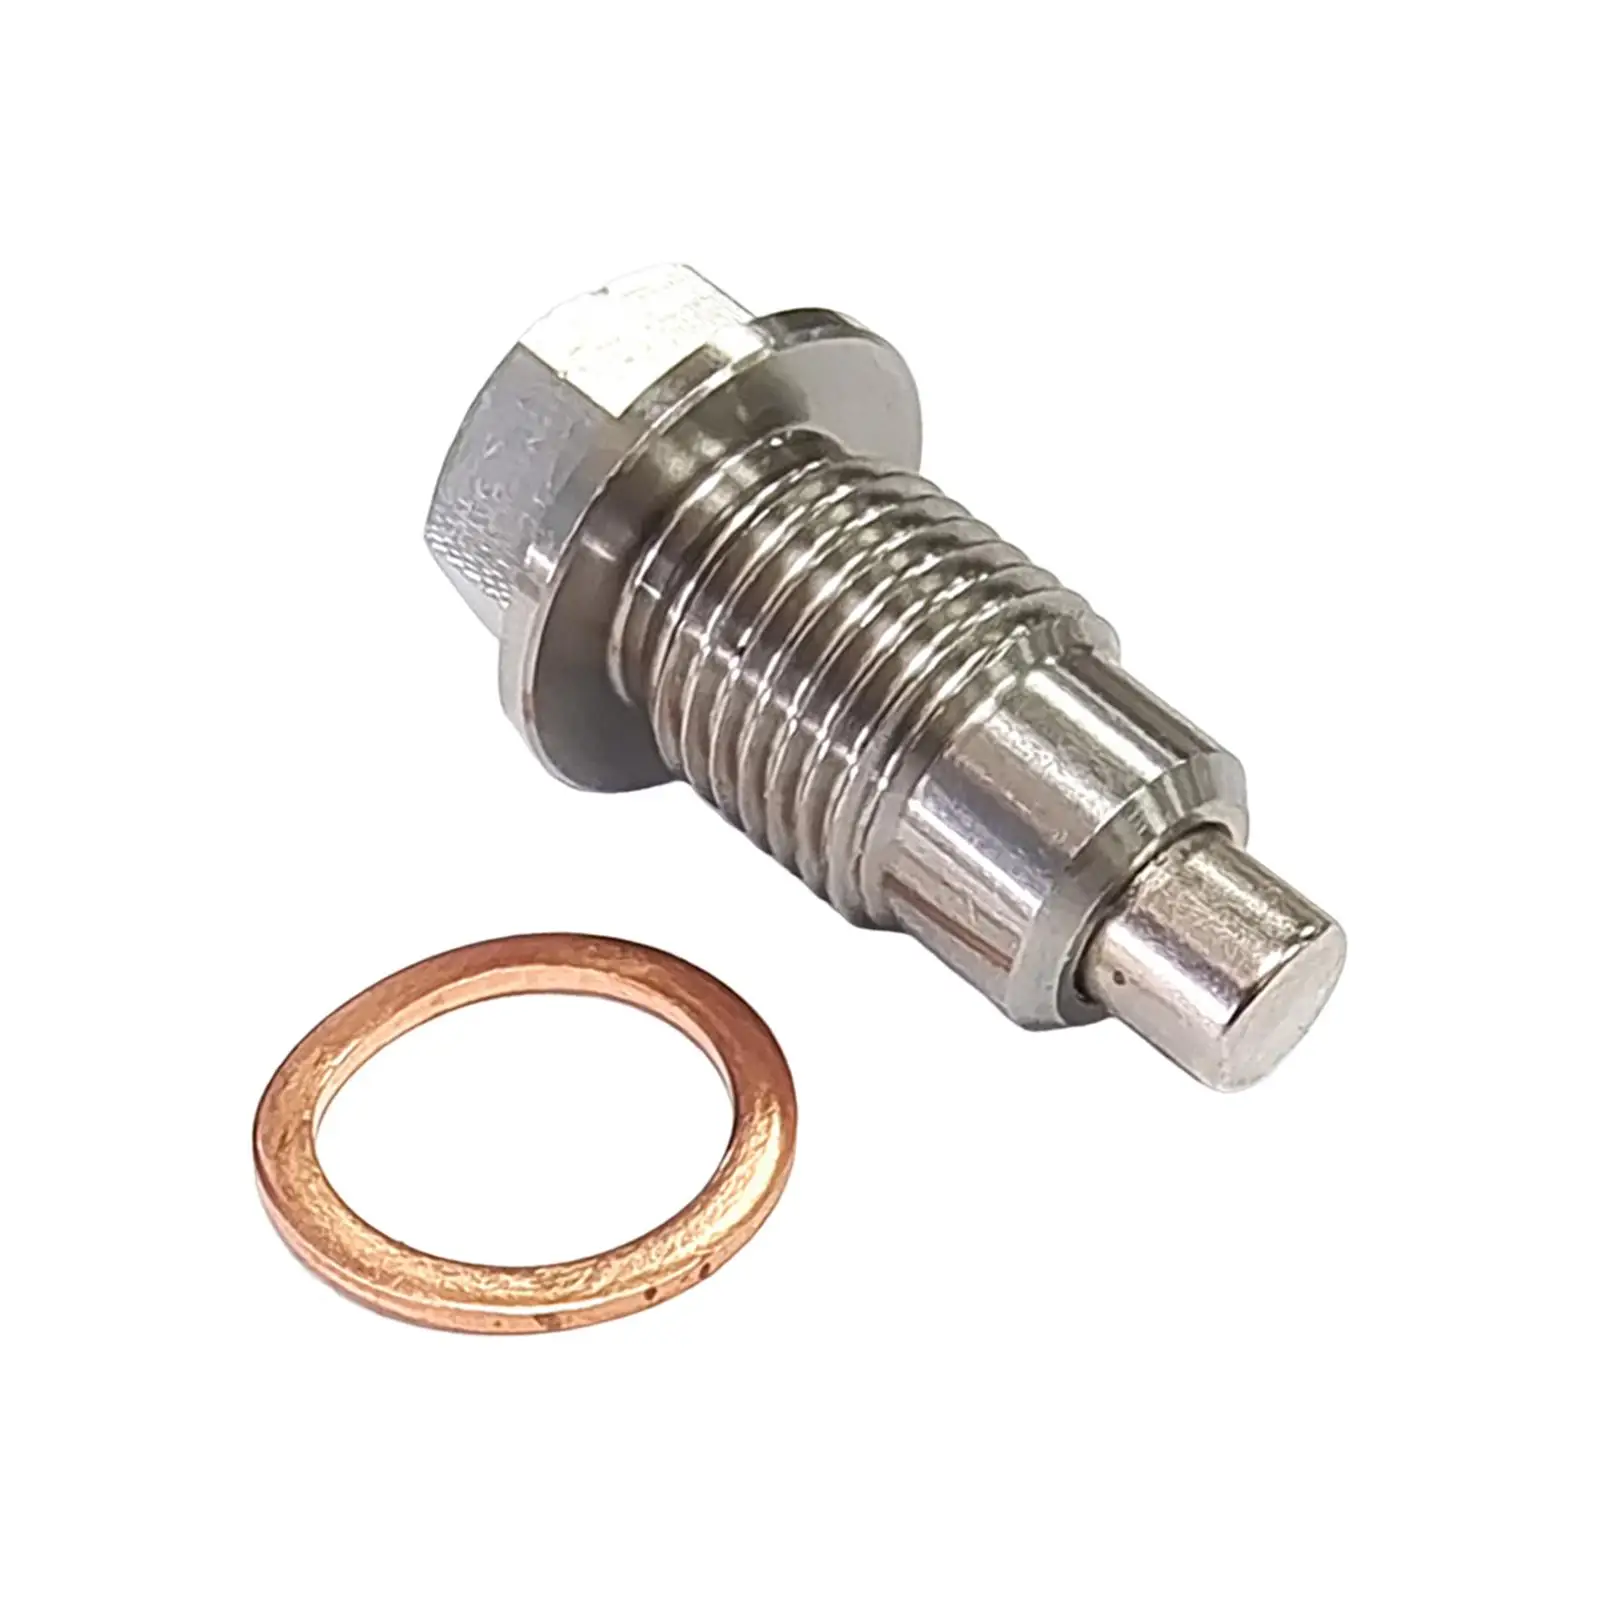 Oil Drain Plug M12x1.25 with Cooper Washer Oil Pan Drain Plug Stainless Steel